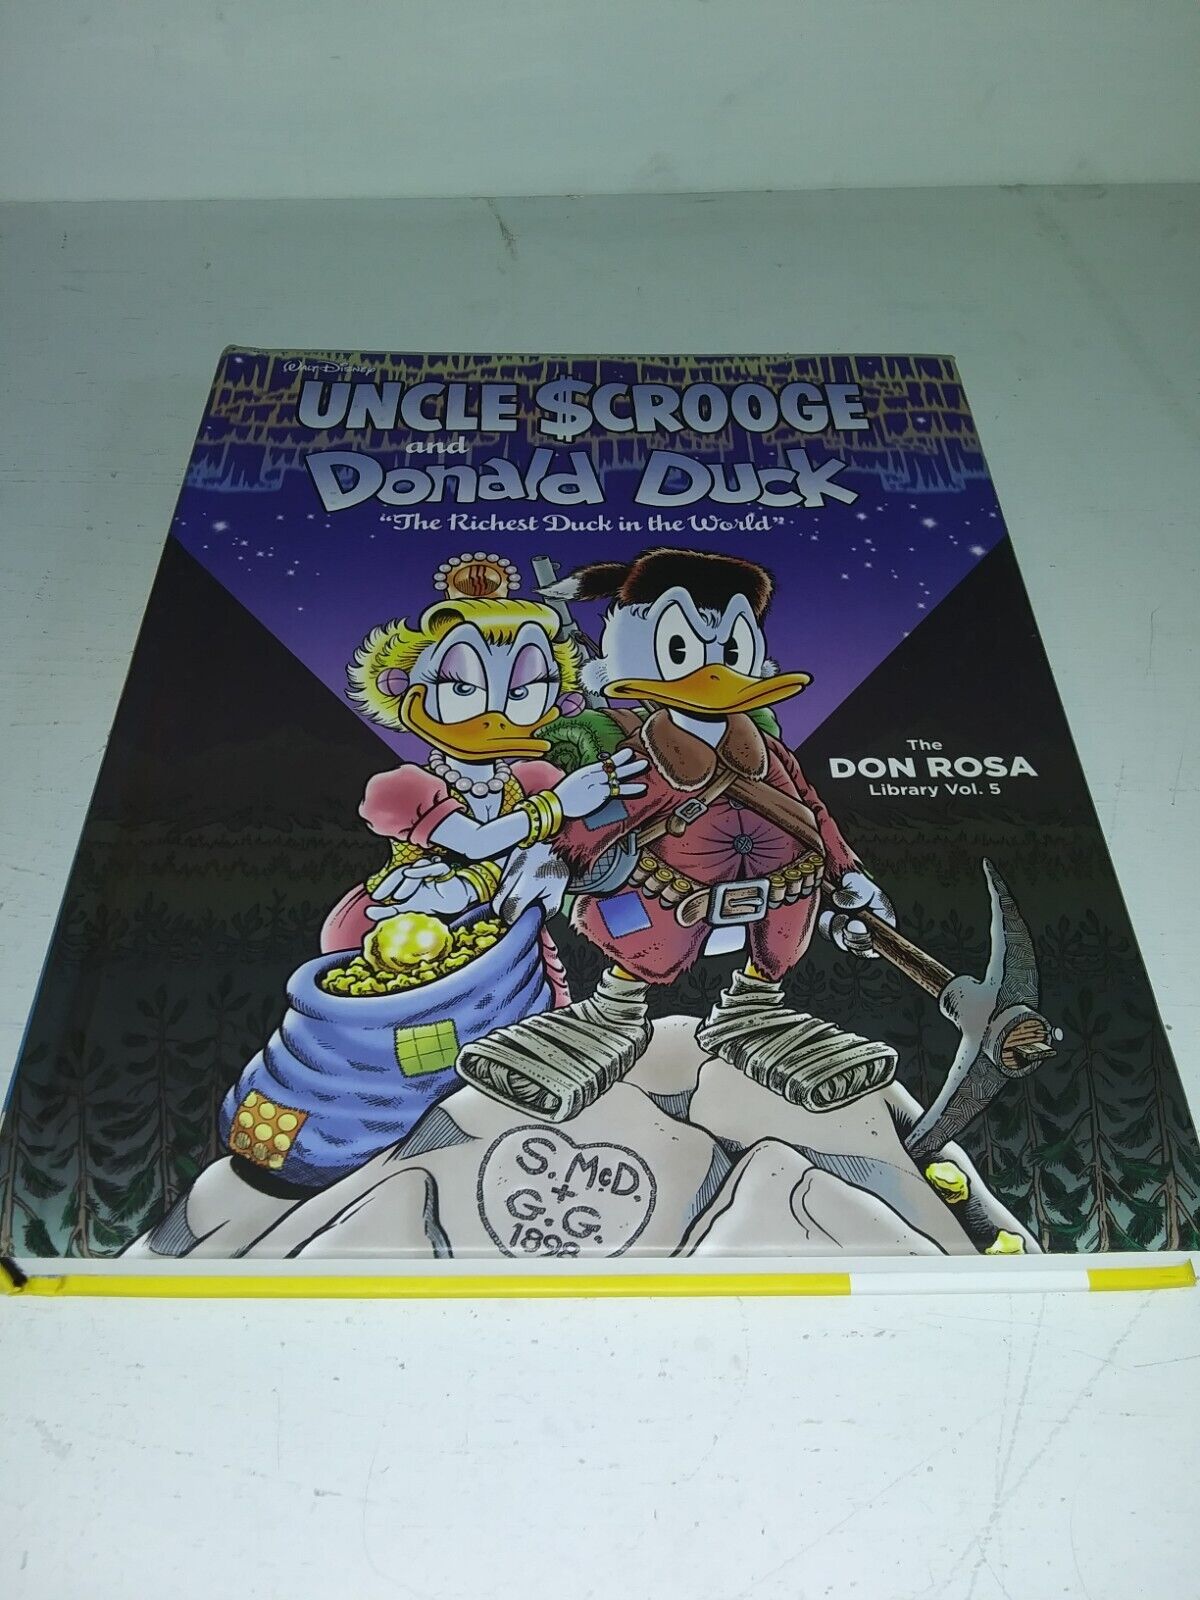 FB - UNCLE SCROOGE AND DONALD DUCK VOL. 5 HC - DON ROSA LIBRARY - & RARE